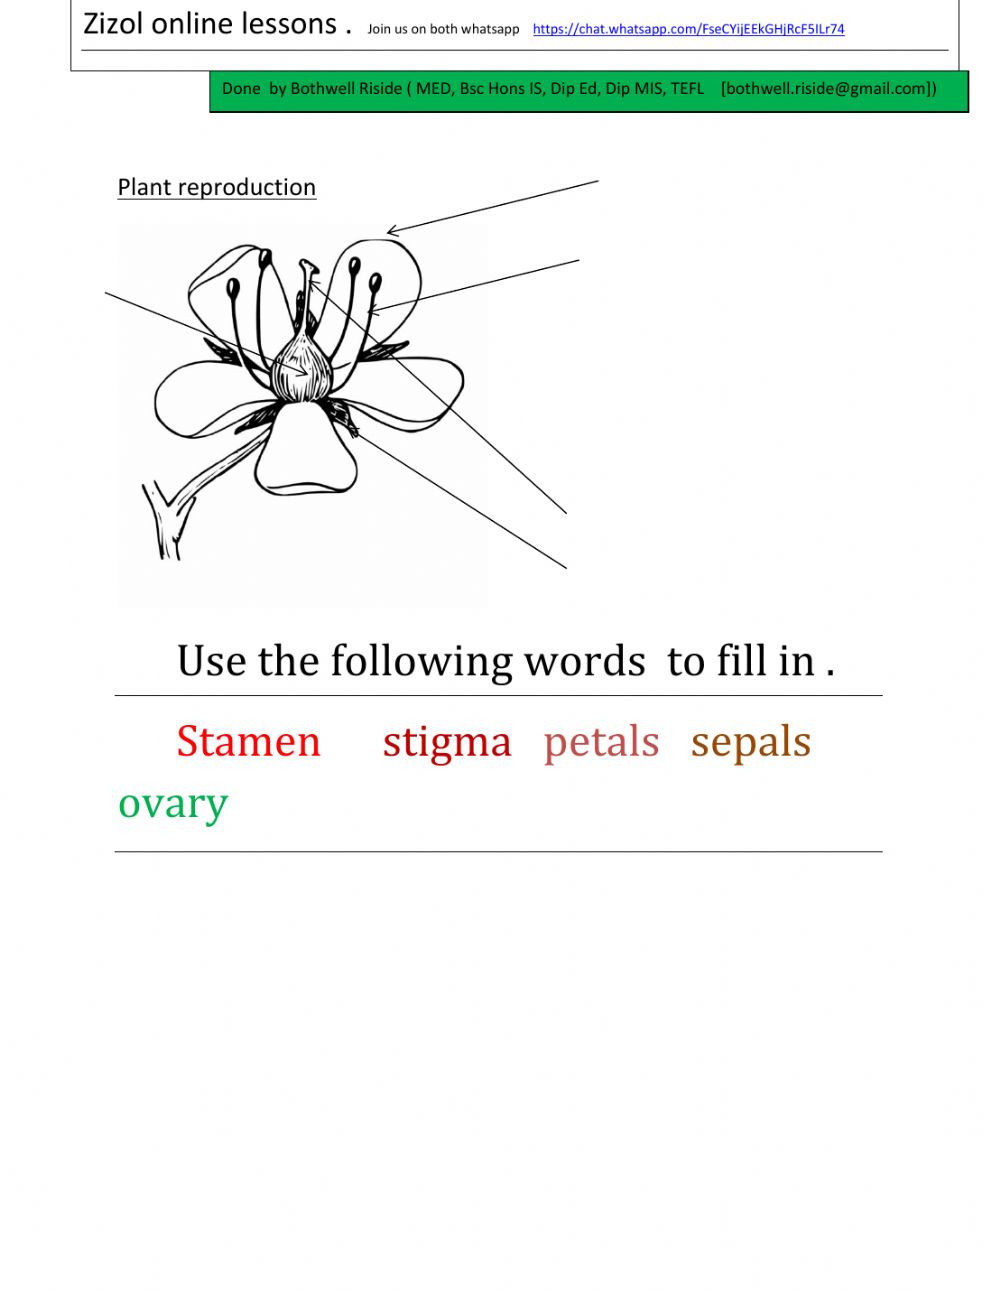 Plant Reproduction Worksheet Answers Grade 7 Plant Reproduction by Bothwell Riside Interactive